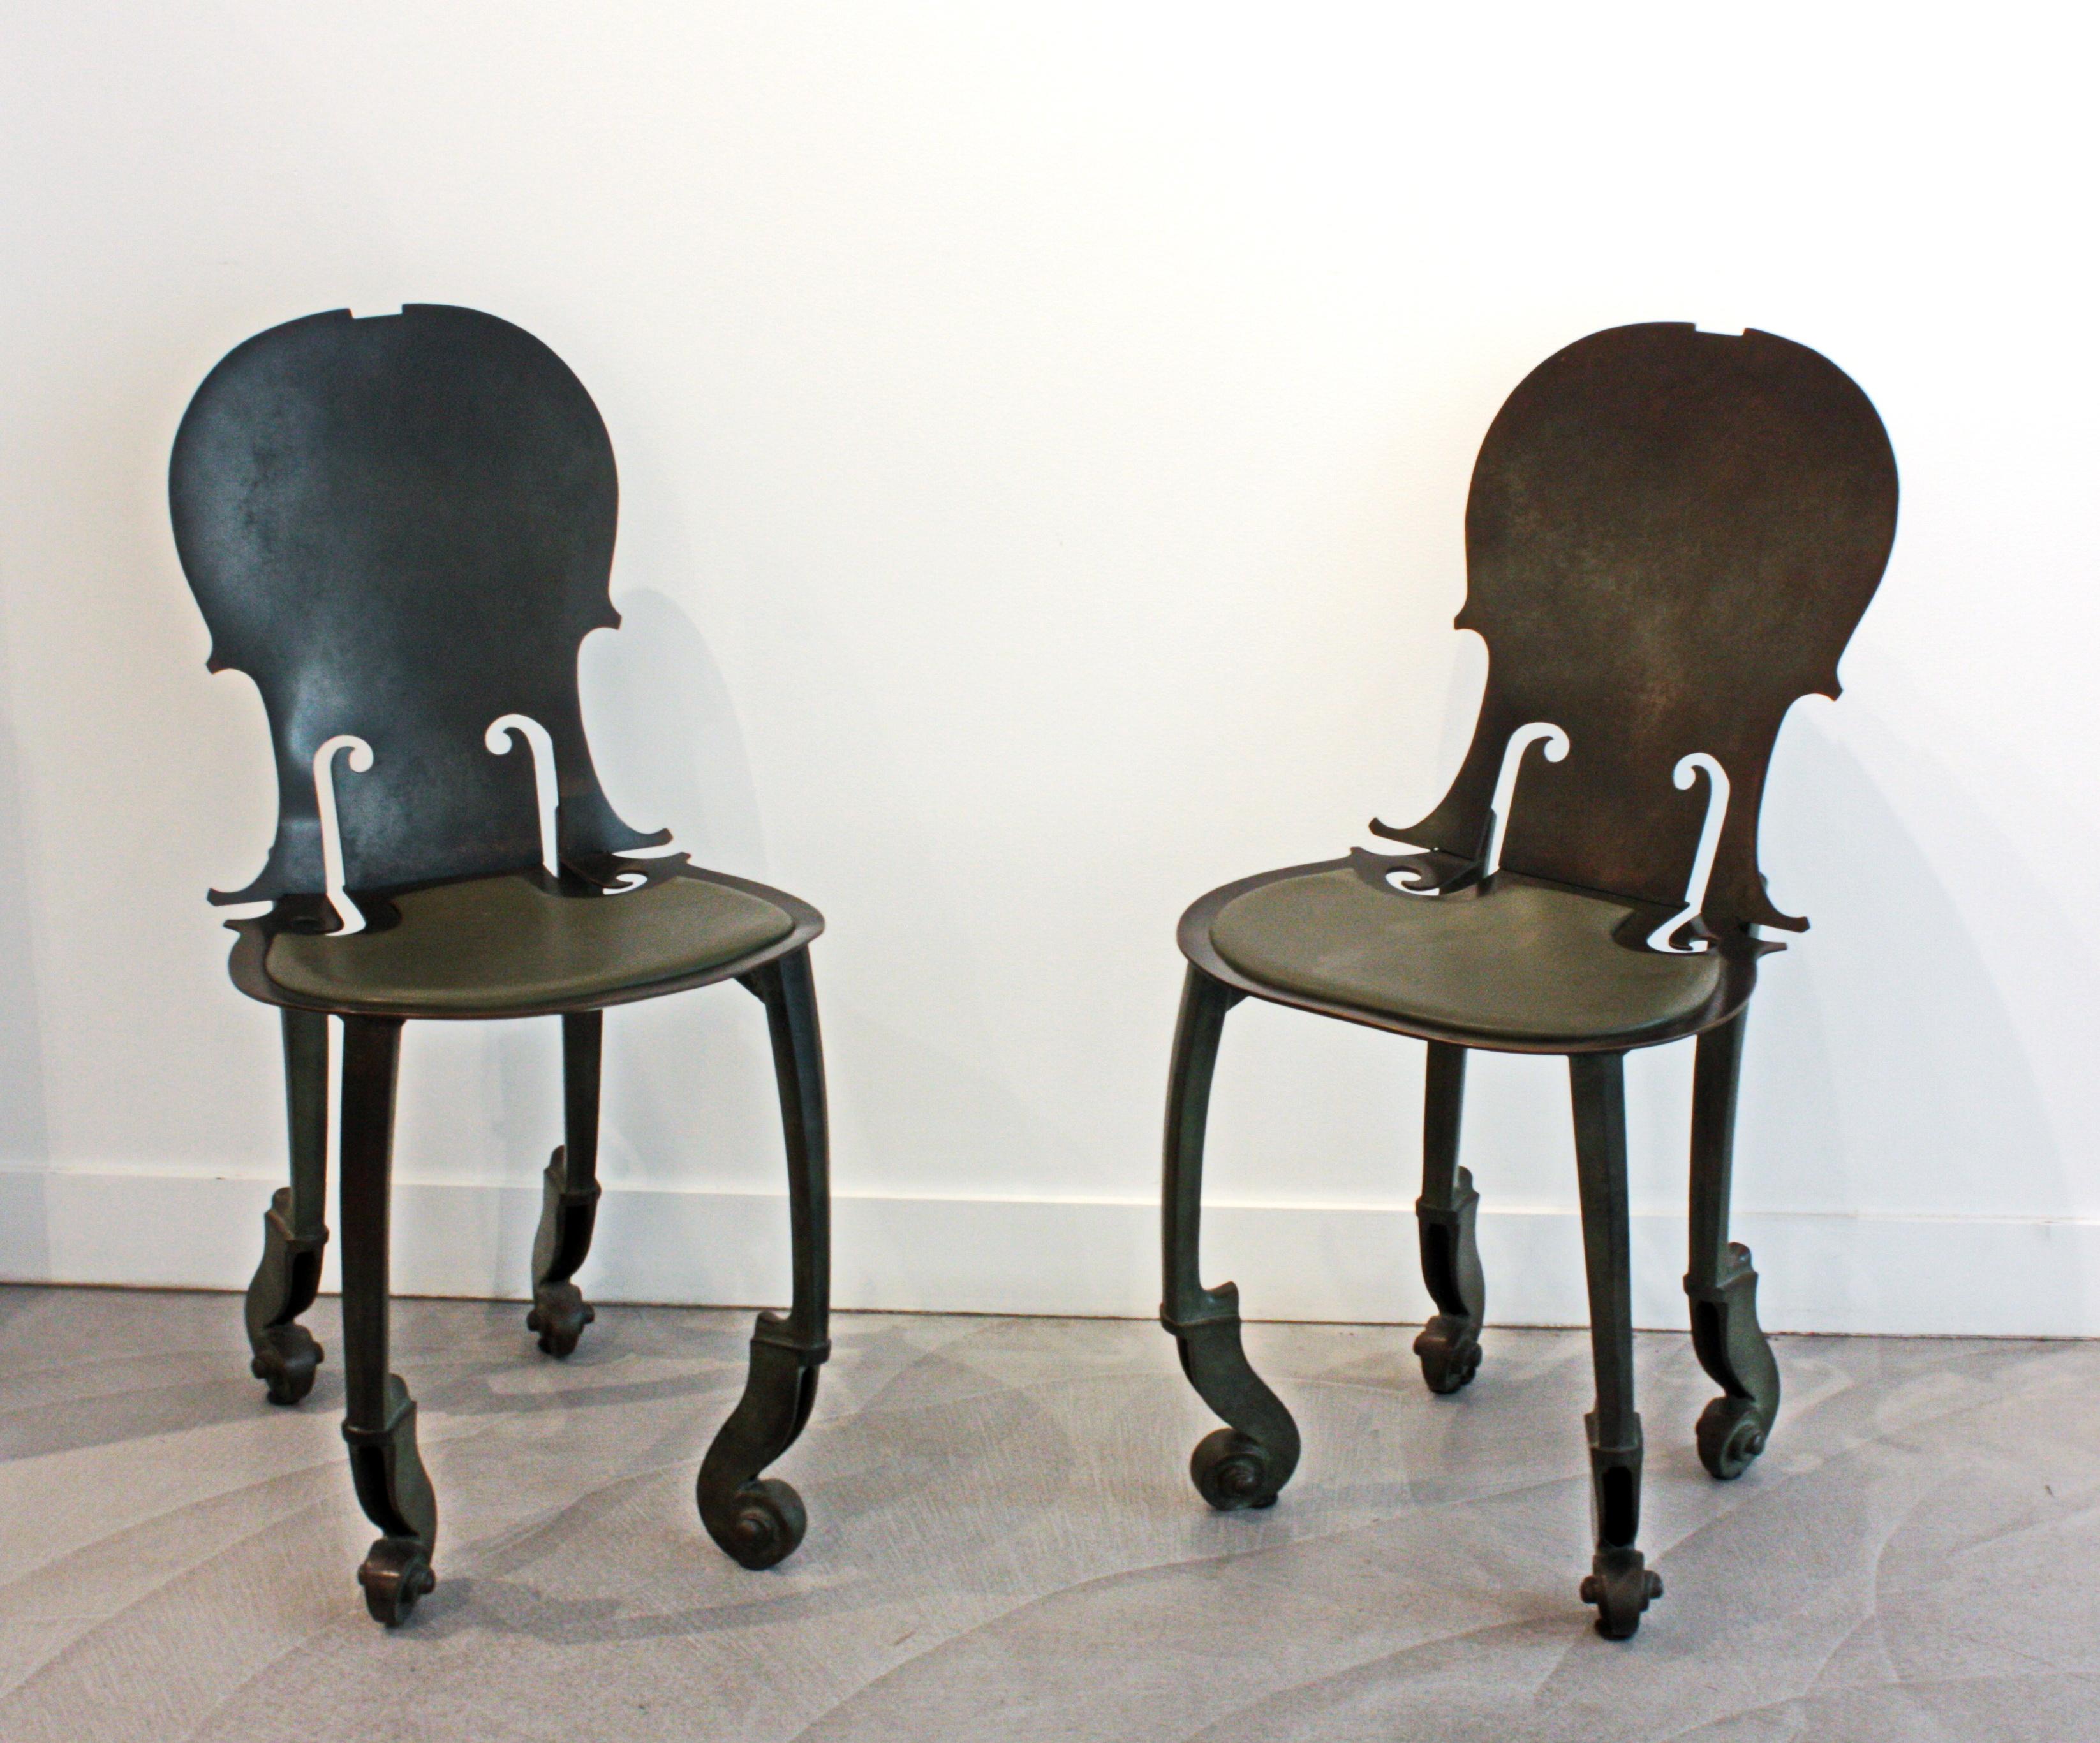 Arman Pair of Cello Chairs in Bronze Antique Green Patina and Green Leather Seat 1